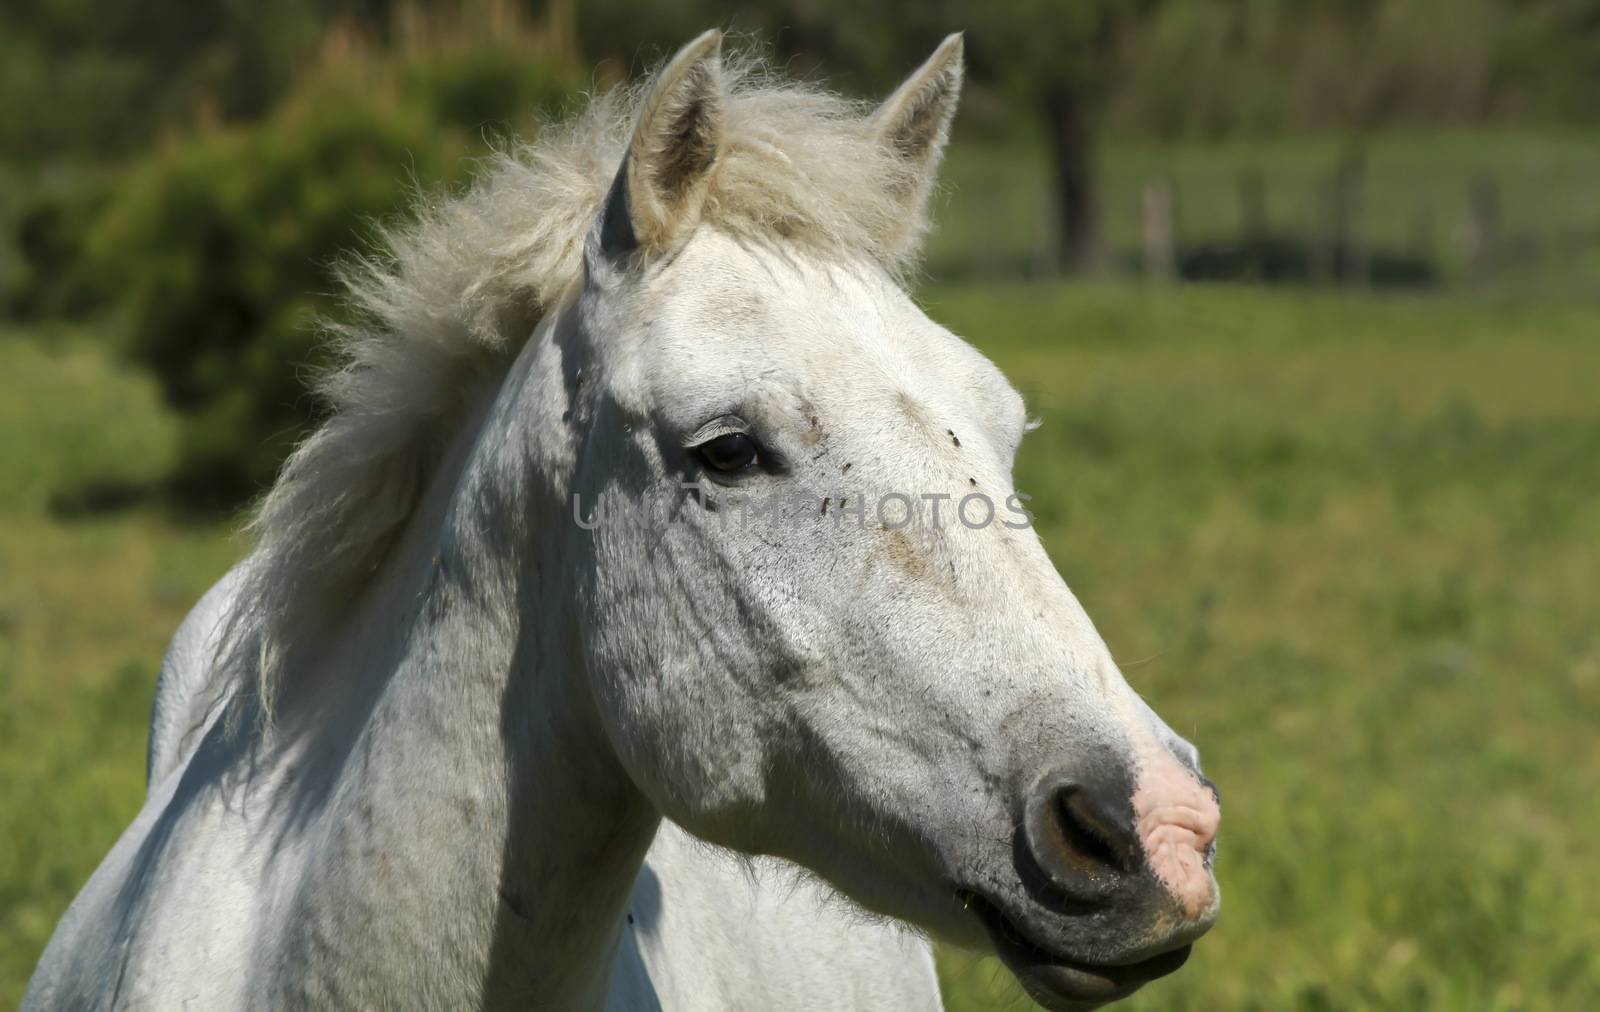 Very beautiful horse from Camargue in France by mariephotos